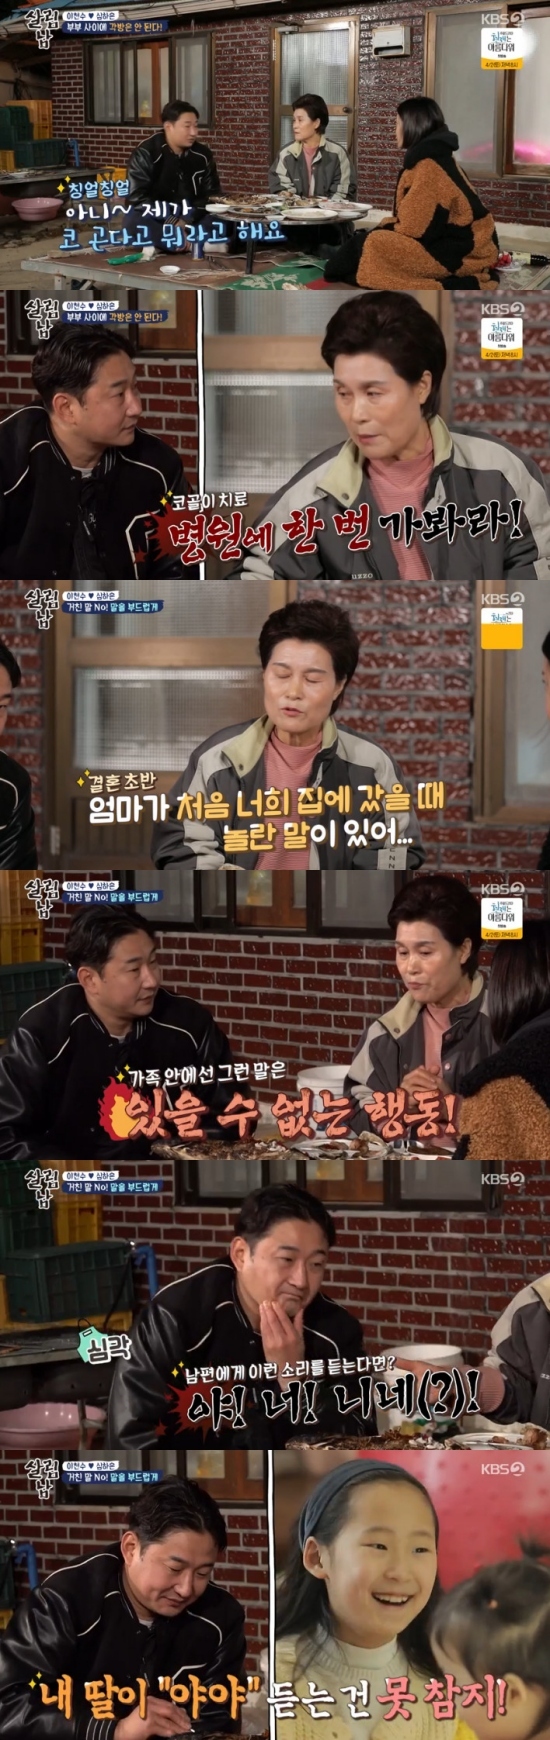 Former footballer Lee Chun-soos Zhang Mo has confided in his sad feelings.On KBS 2TV Saving Men Season 2 (hereinafter referred to as Salimnam), a scene in which Lee Chun-soo told Lee Chun-soo about his intentions was broadcast.Lee Chun-soo Zhang Mo brought beer after grandchildren fell asleep on the day.Lee Chun-soo Zhang Mo said, In two ways, one of my son-in-law, who has been in a long time, wanted to give me a hard time and wanted to talk about what I was in.Lee Chun-soo Zhang Mo said, Never mind, look at the key. If you say Father, you look at the second floor. Father is on the second floor.Why do you sleep separately? Lee Chun-soo said, What do you say you are snoring? Lee Chun-soo Zhang Mo said, If you have a bad snoring, go to the hospital.Furthermore, Lee Chun-soo Zhang Mo said, Go ahead and have a surprise at first. Hey, you. You. I was so surprised to say Ya to HAEUN.Youre going to blow up in Salimnam. Honestly, it cant be in the family. Were precious sons, precious daughters.Lee Chun-soo excused, saying, The monitor is suddenly down, and Lee Chun-soo Zhang Mo said, Is that what the monitor says is down?I was in there. Mom used to go and watch. I used to play soccer at home. Good son. This needs to be fixed.No way, he said.Lee Chun-soo Zhang Mo said, HAEUN AS HAEUN is so lovely. HAEUN is also a baby.Its a shame on their faces. It really hurts me. My lord is big.You guys, he added, adding, Think your brother-in-law is (to daughter Lee Ju-eun) Yayyah.Lee Chun-soo has been furious, saying, You should kill him.In particular, Lee Chun-soo Zhang Mo said, Theres another mom, just this.HAEUN has a lump in the thyroid, he said, referring to the health condition of Shim HAEUN.Lee Chun-soo Zhang Mo said: My mother is heartbroken to hear HAEUN speak, every day... and my mother cried when she heard the story.I didnt know she was so sick, but HAEUN said she didnt. Losing health makes me lose everything. Too sad.Ive spoken, so Im good in the future, he said.I feel bad, because I feel bad when I think of my daughter as a mother, so how hard it was to be alone, Shim HAEUN lamented.Lee Chun-soo said, I am sorry that HAEUN thinks that it will be busy, what will it do?HAEUN also asks me to talk to me, and promised to keep in mind Lee Chun-soo Zhang Mo.Photo = KBS Broadcasting Screen